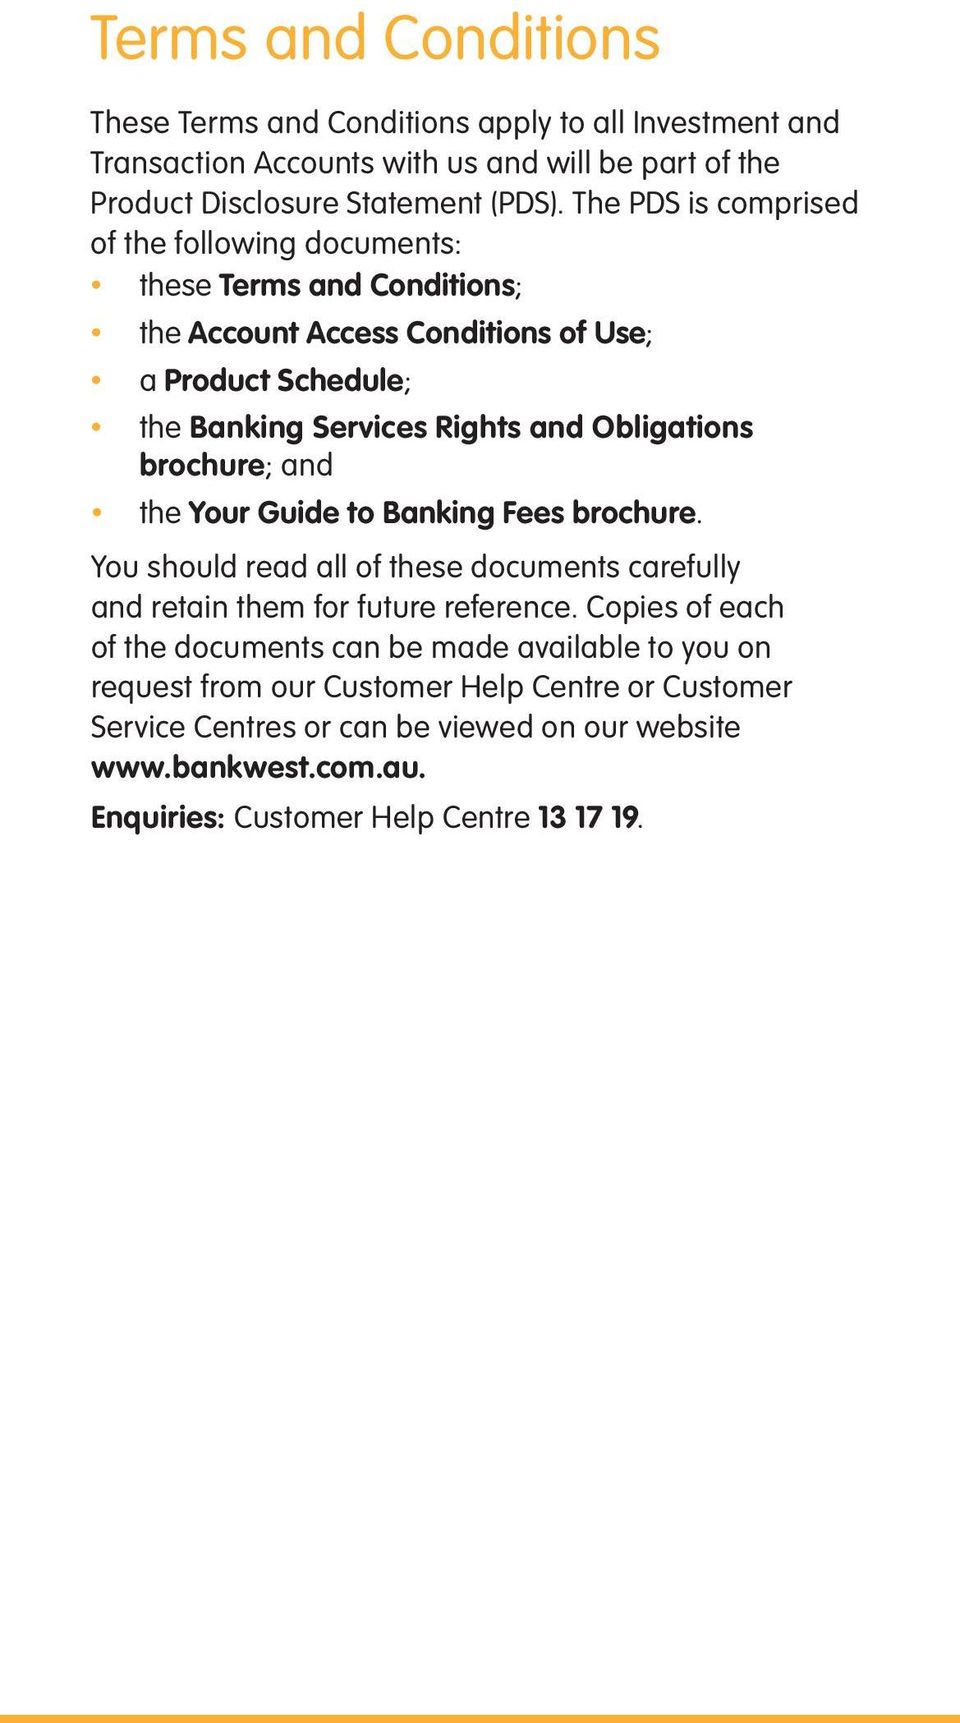 Obligations brochure; and the Your Guide to Banking Fees brochure. You should read all of these documents carefully and retain them for future reference.